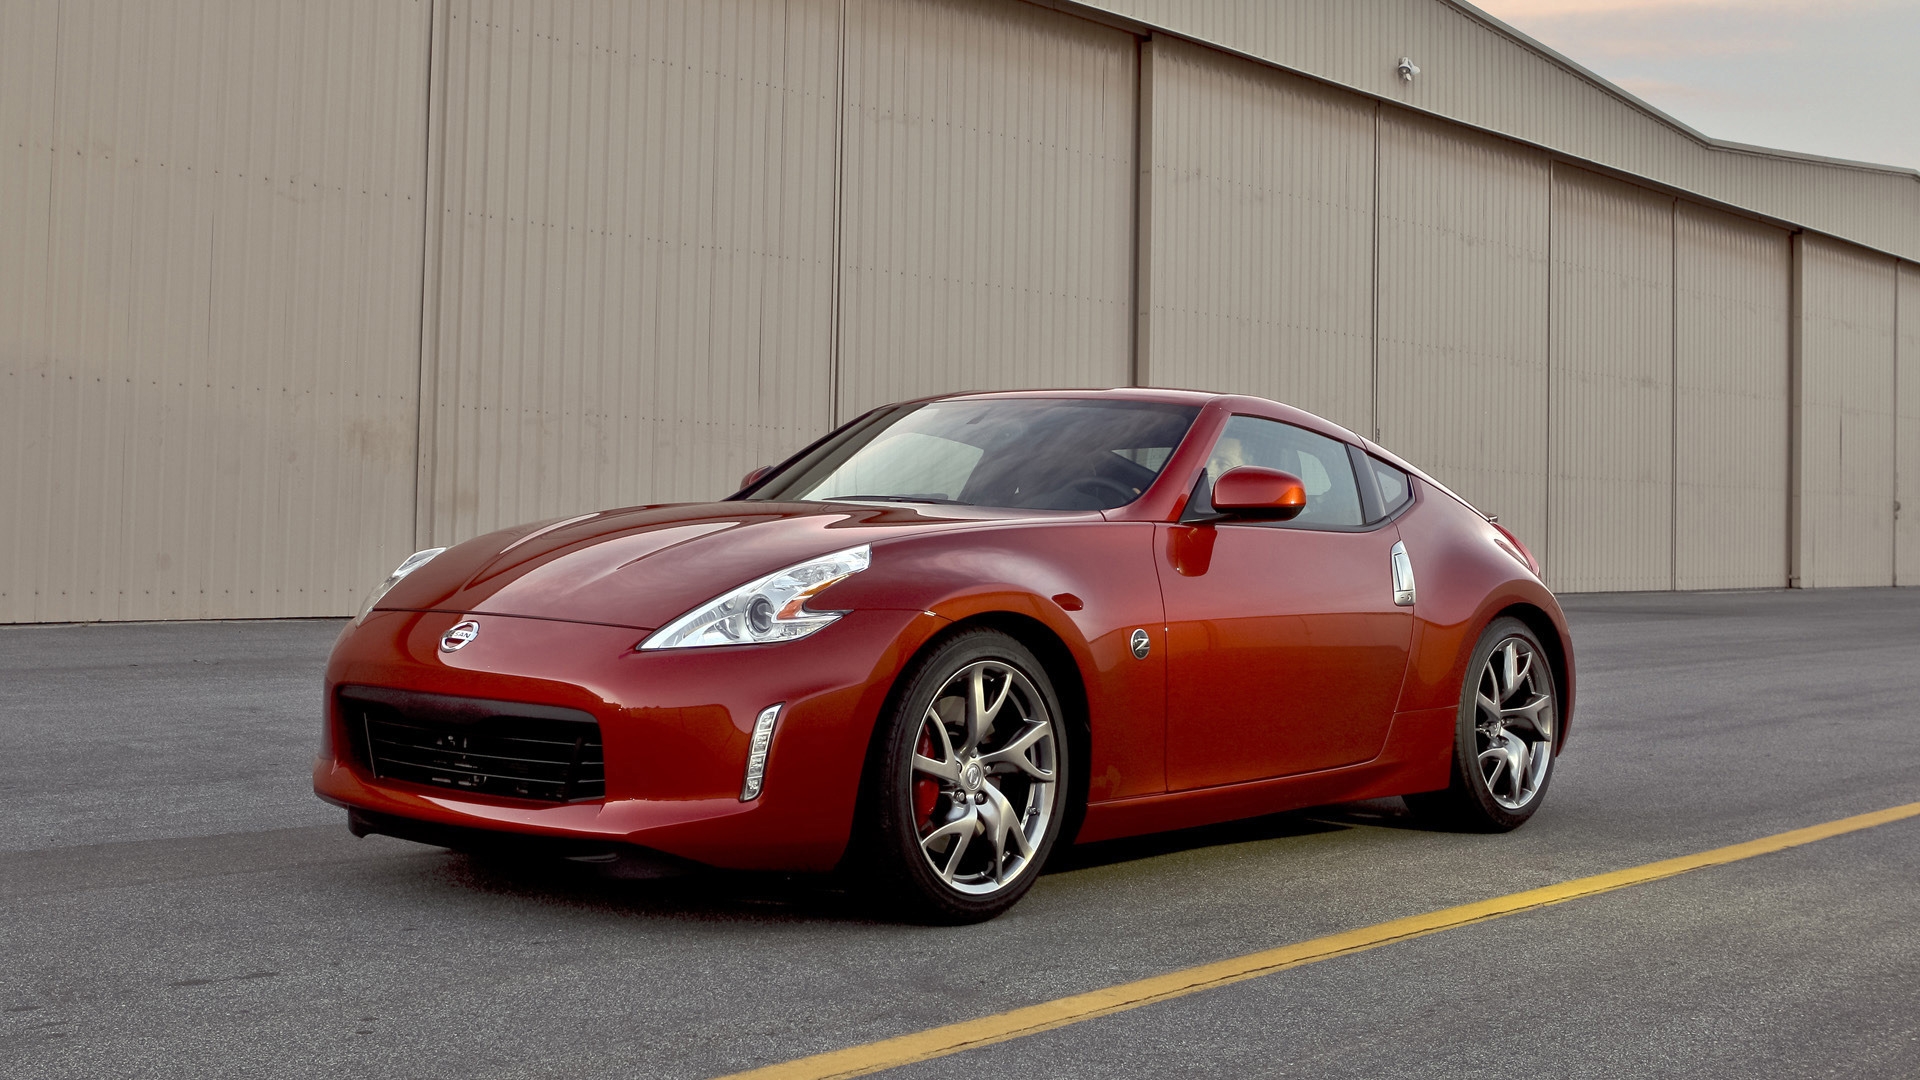 2013 Nissan 370Z Magma Red for 1920 x 1080 HDTV 1080p resolution